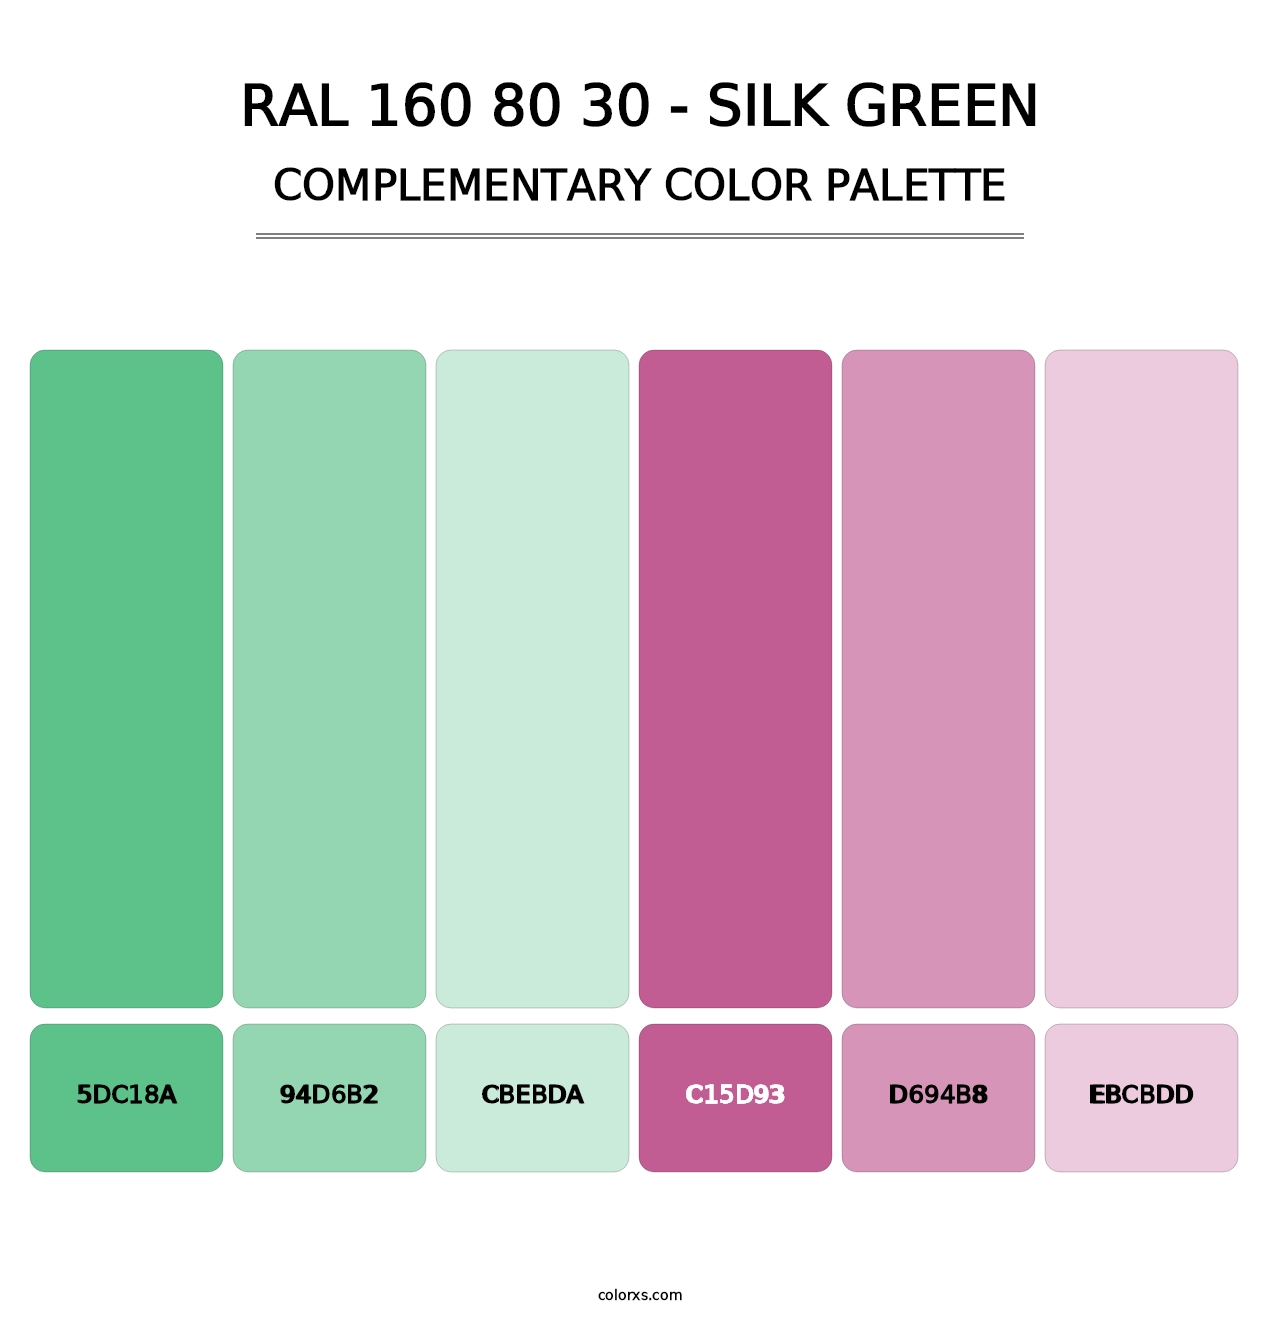 RAL 160 80 30 - Silk Green - Complementary Color Palette